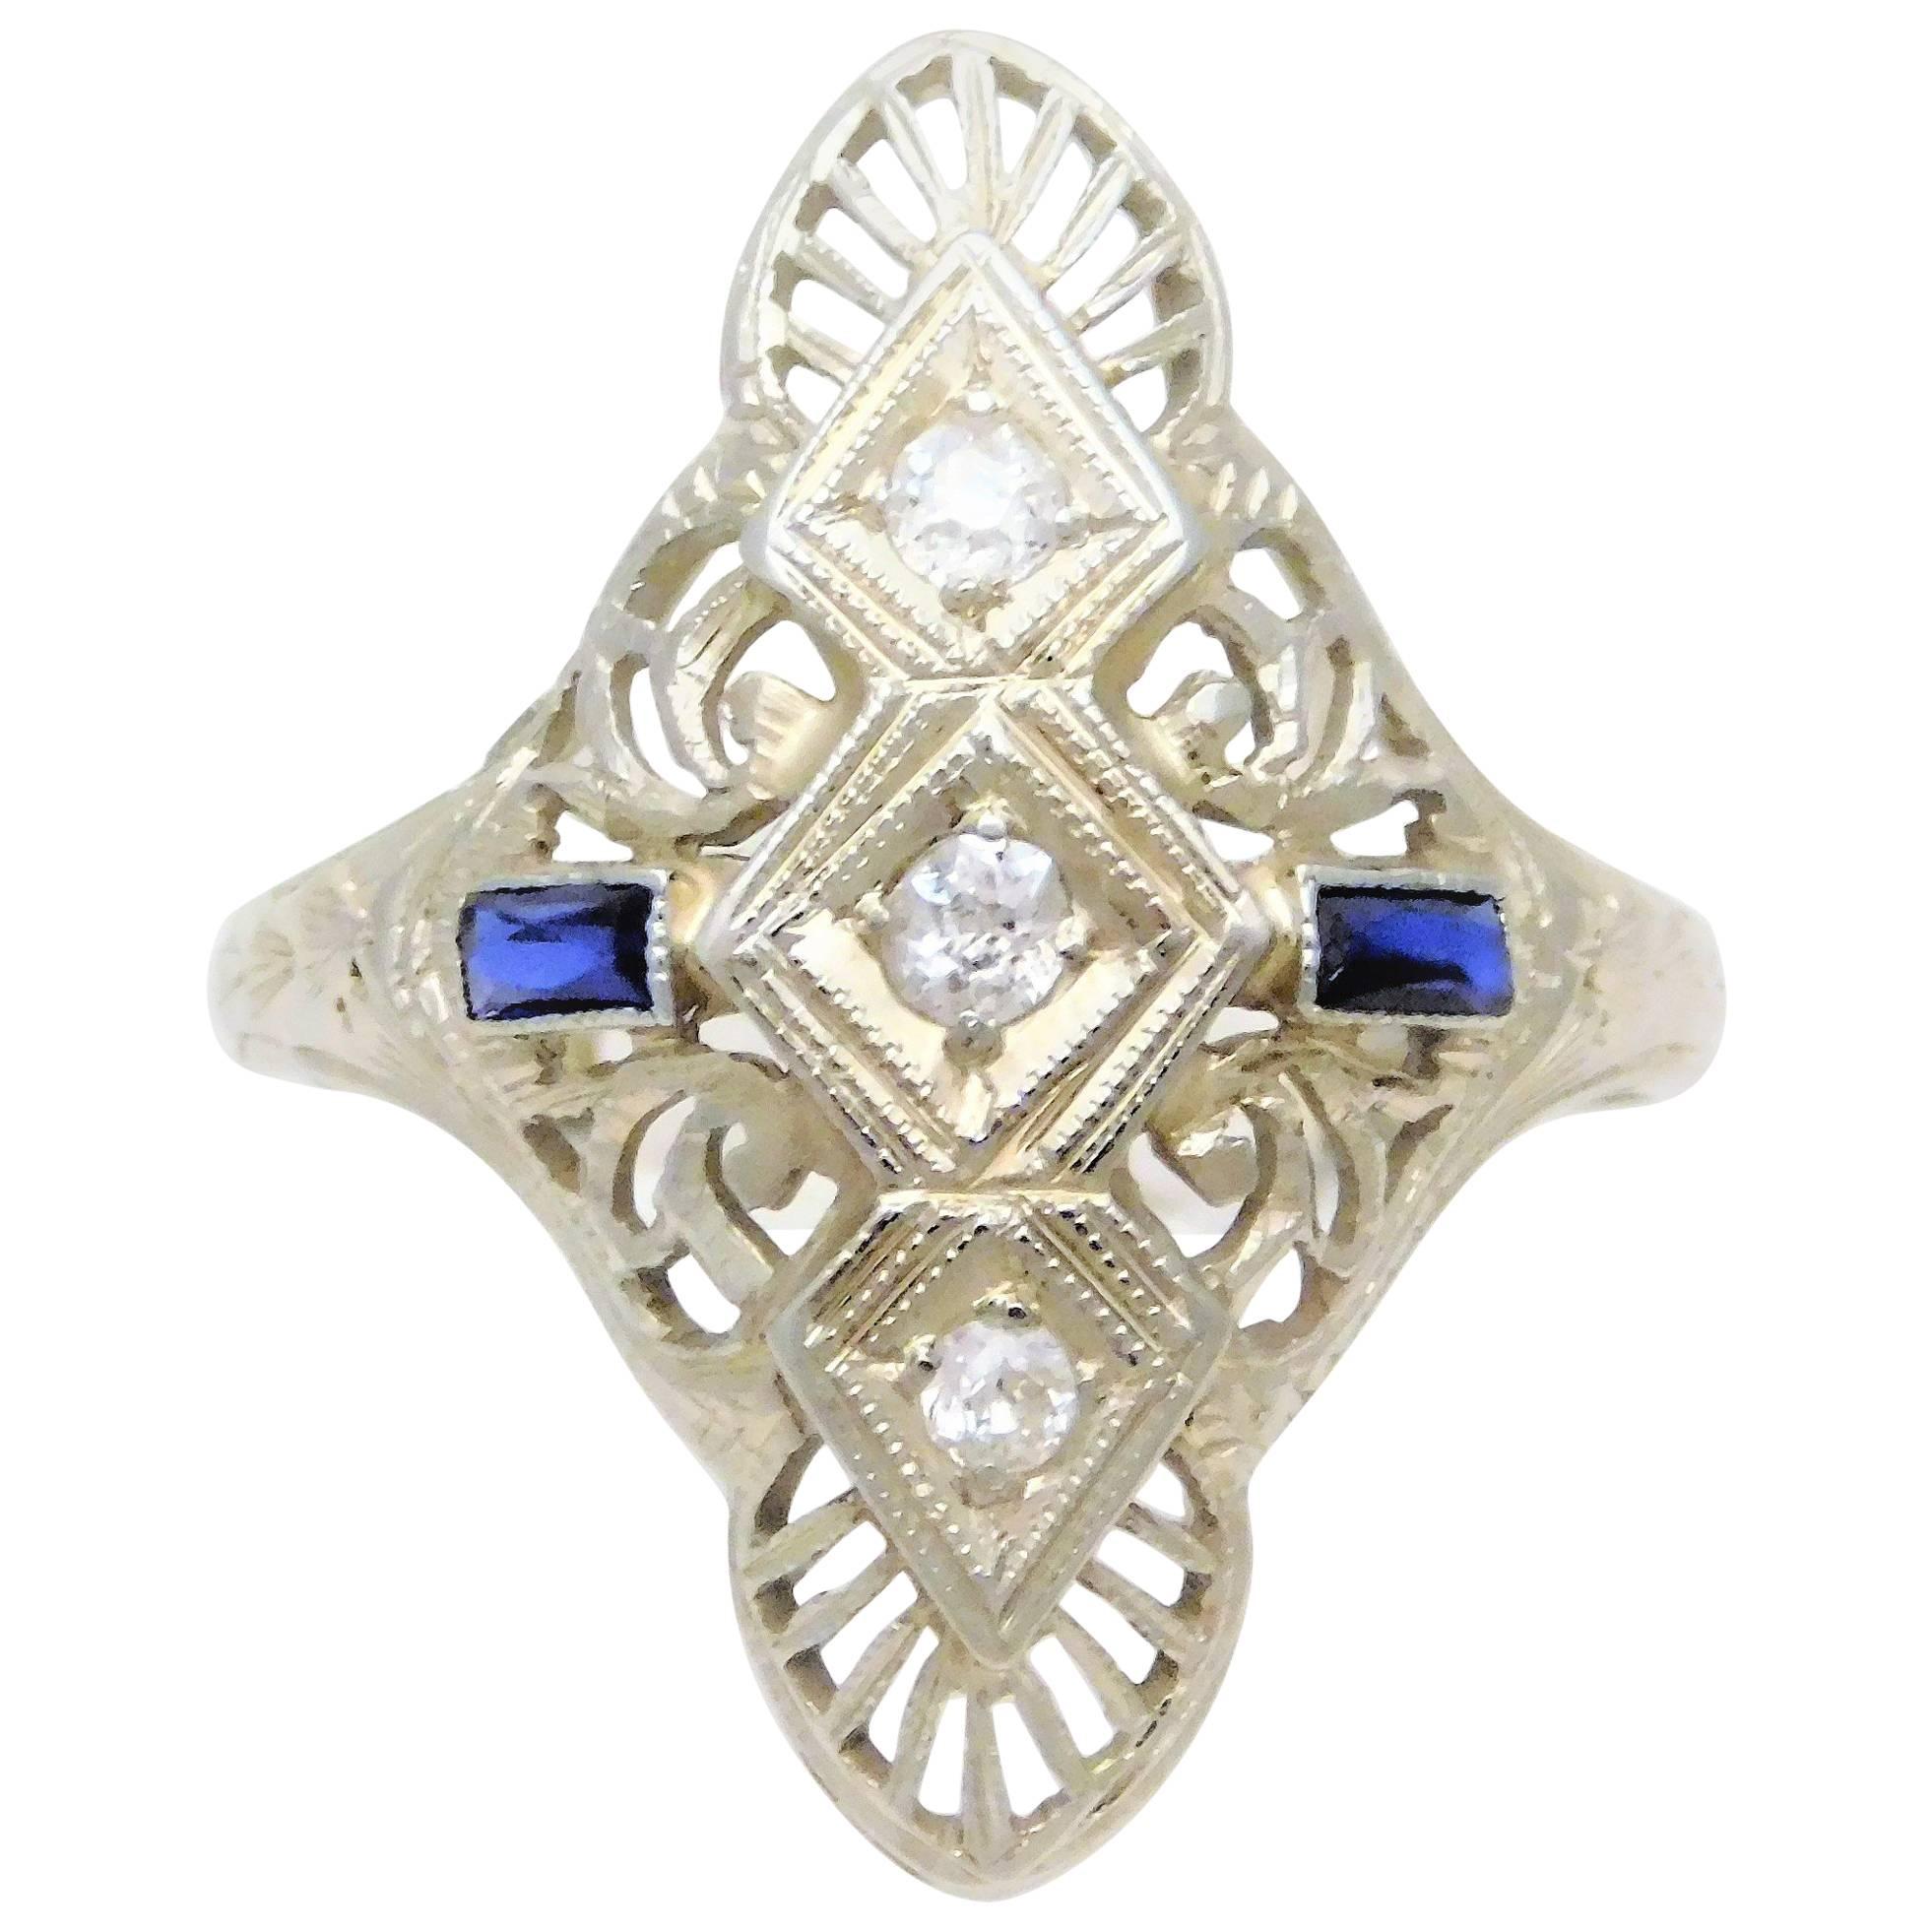 Ladies’ 18k Late Victorian “Shield Ring” with Sapphires and Old Mine-cut Diamond